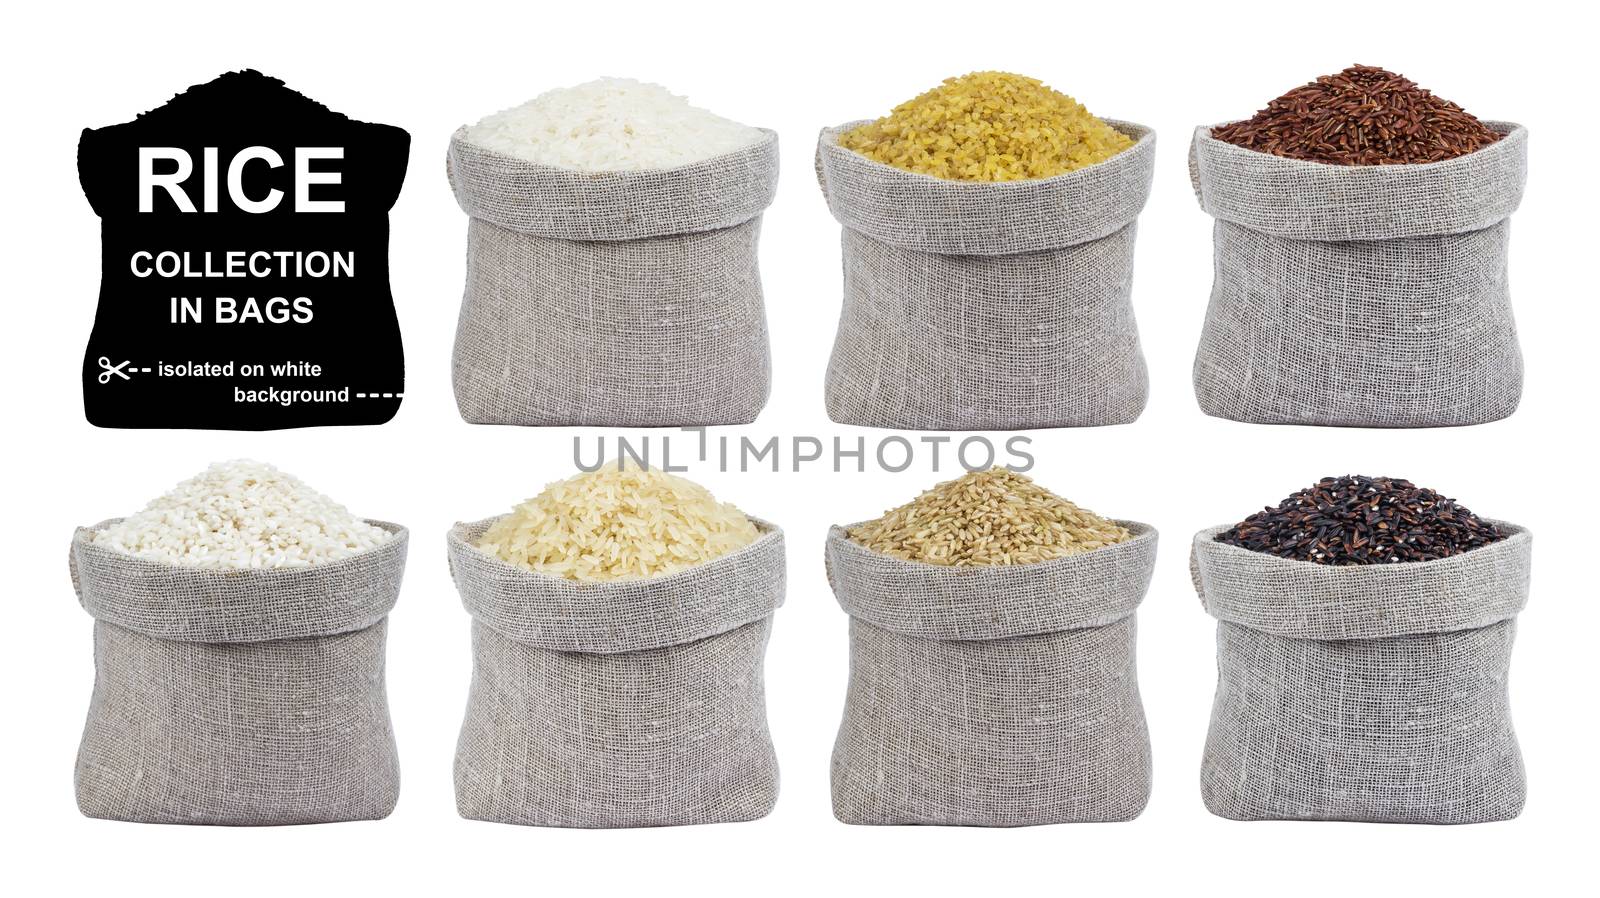 Rice isolated on white background. Different types of rice in bags. Collection